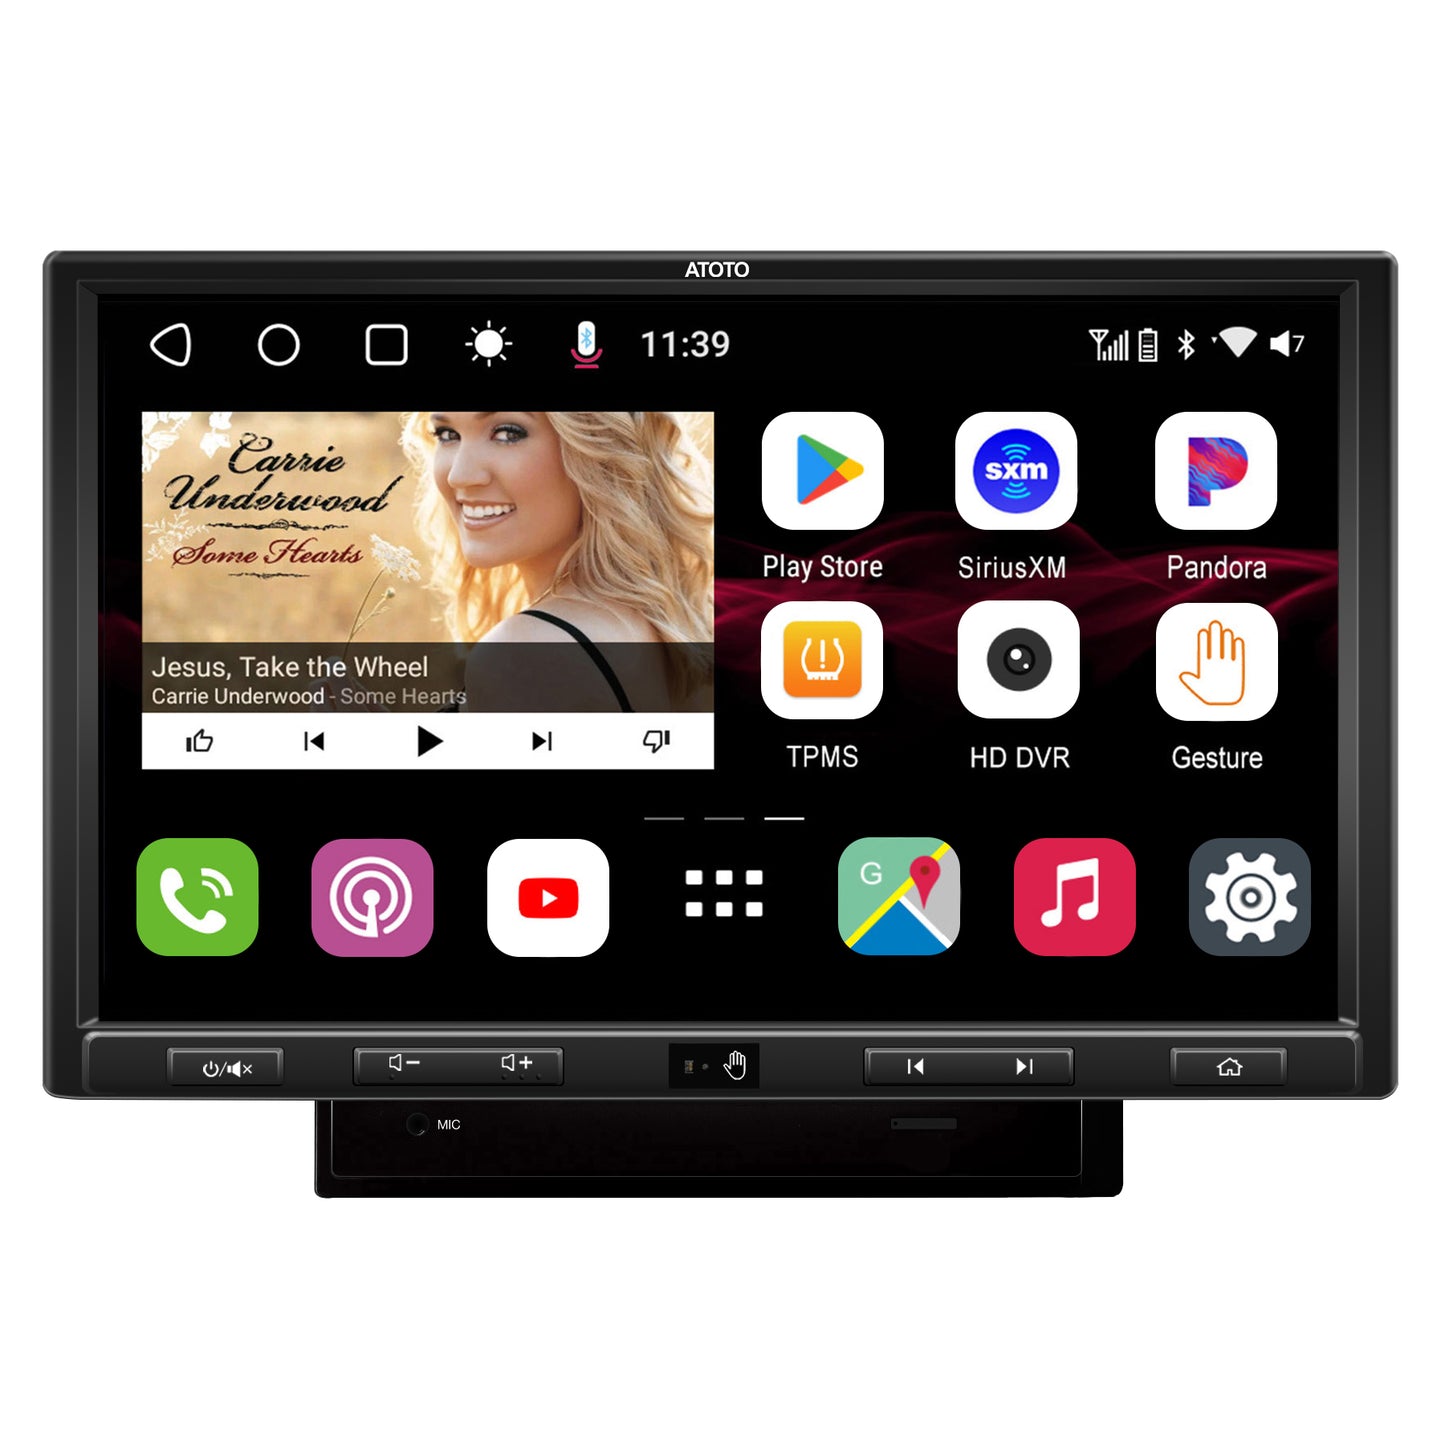 ATOTO S8 Ultra Plus[10.1inch QLED Display] in-Dash Video Receiver, Wireless Carplay & Android Auto,Dual Bluetooth w/aptX HD, VSV&LRV,Built-in 4G Cellular Modem,Gesture Operation,6GB+128GB,S8G2109UP 